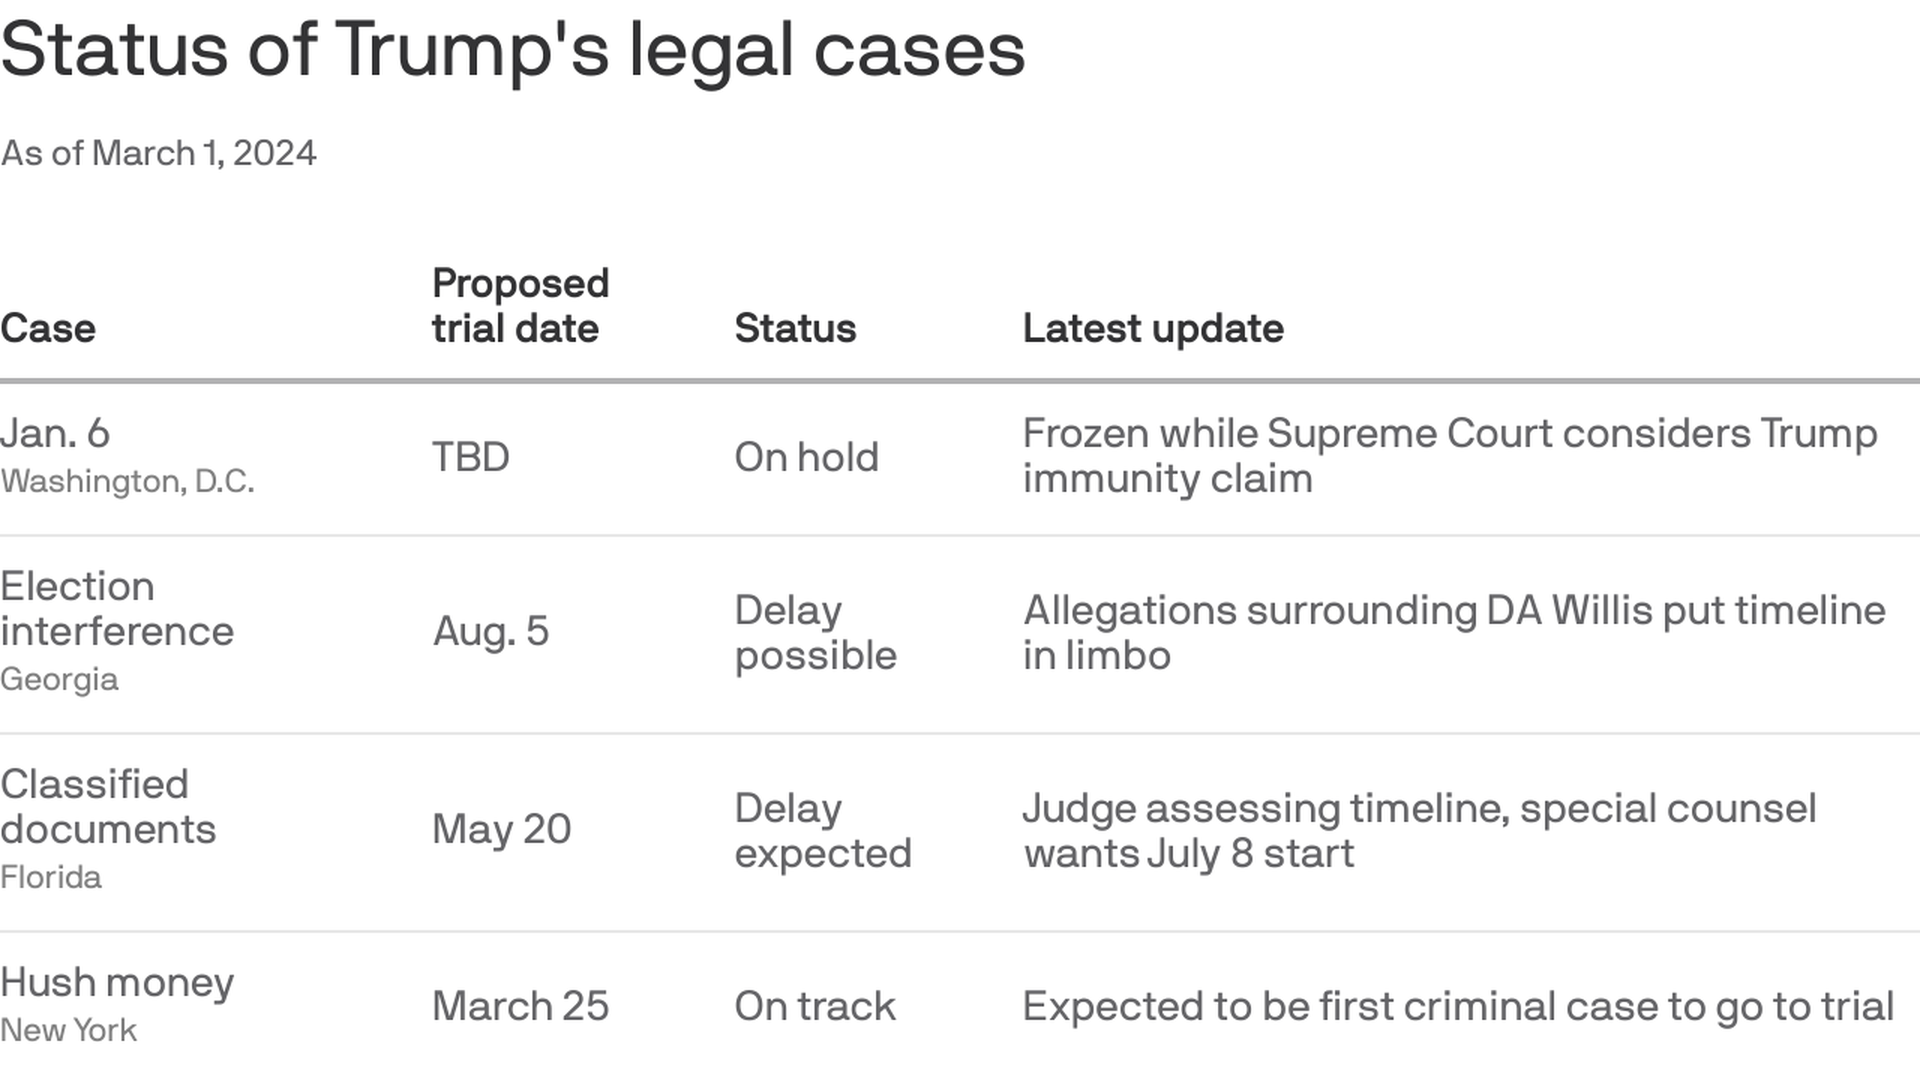 Table showing Trump's cases